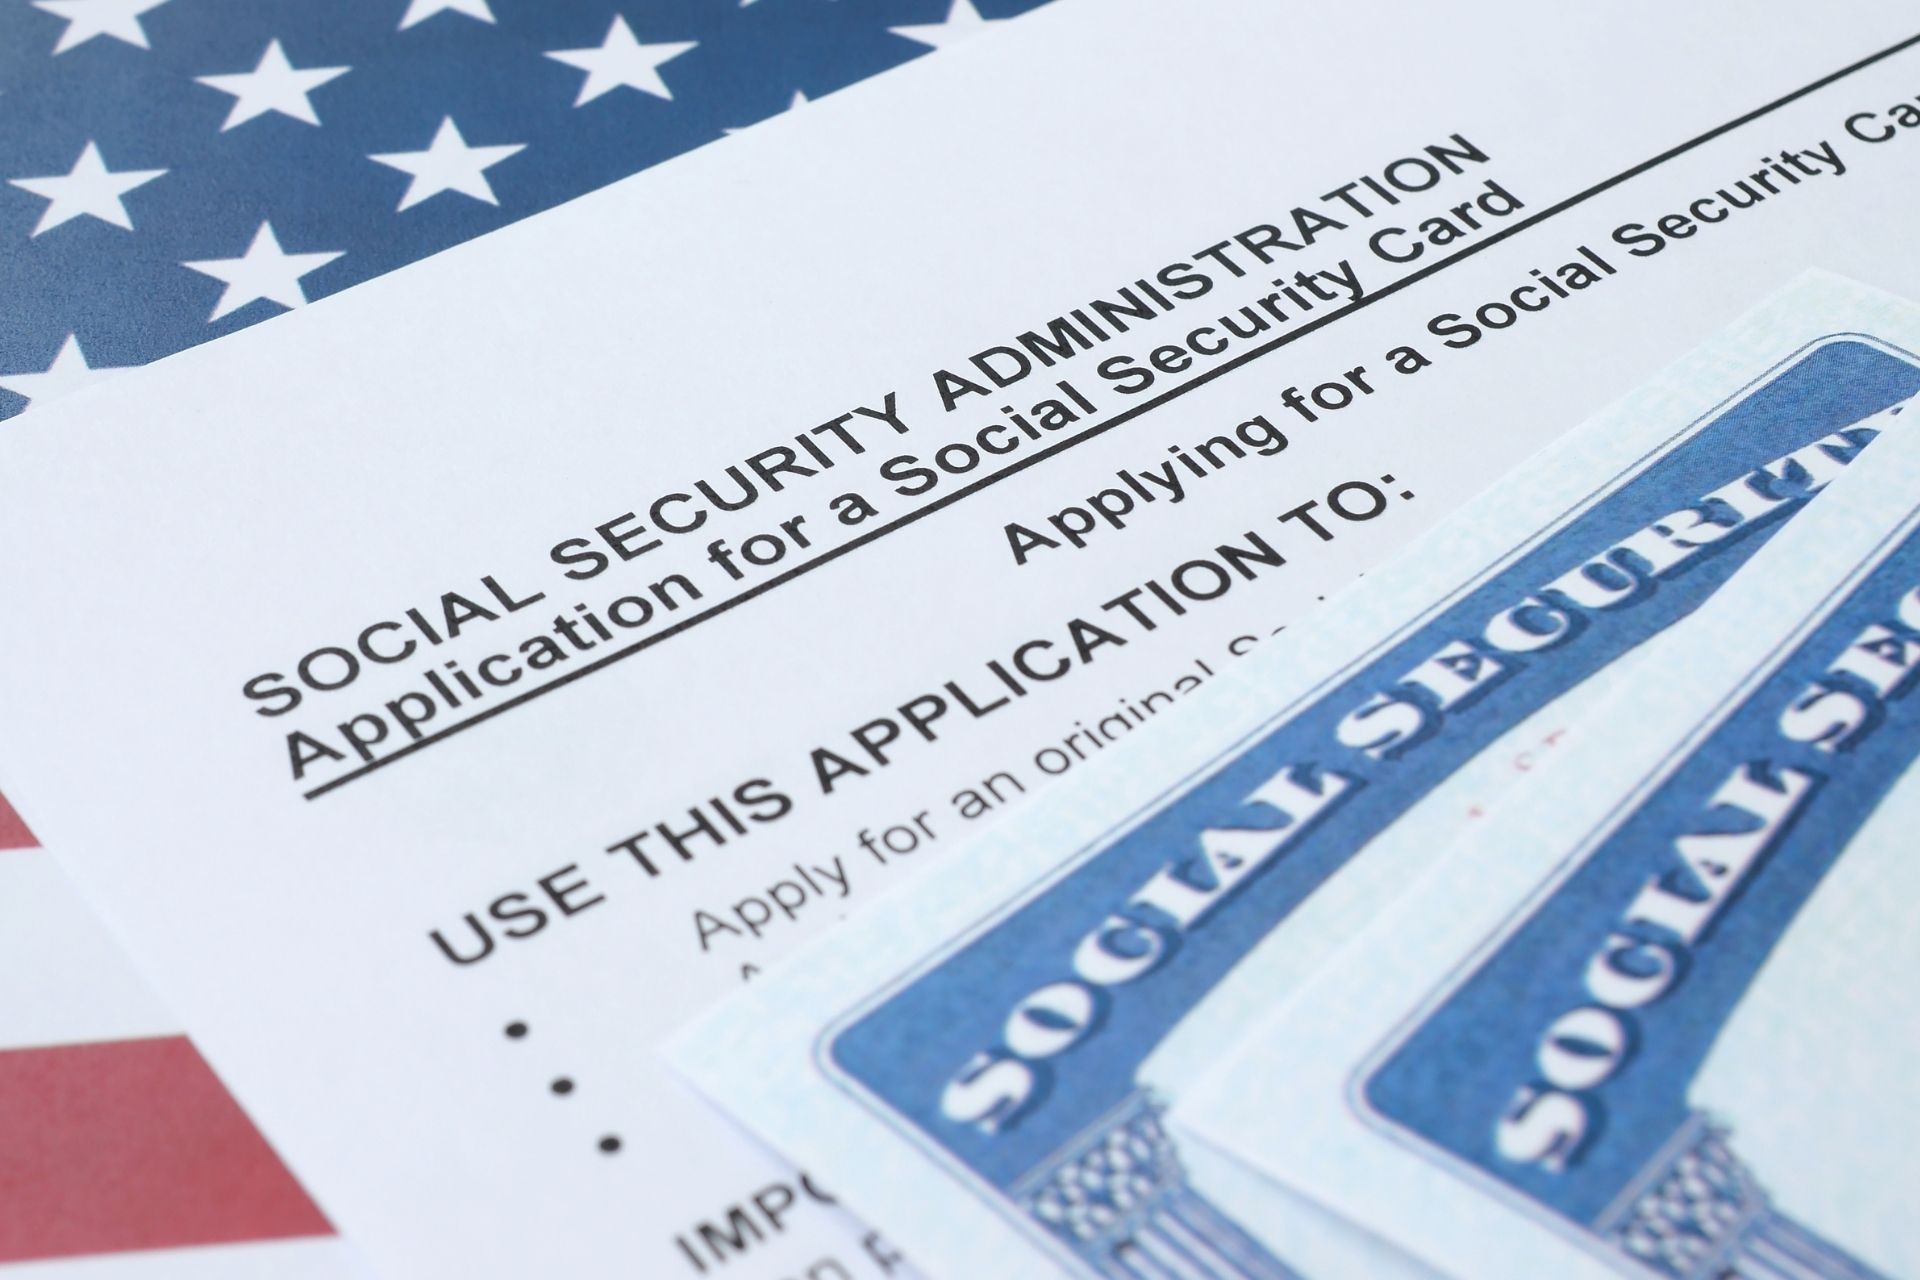 The Future of Social Security